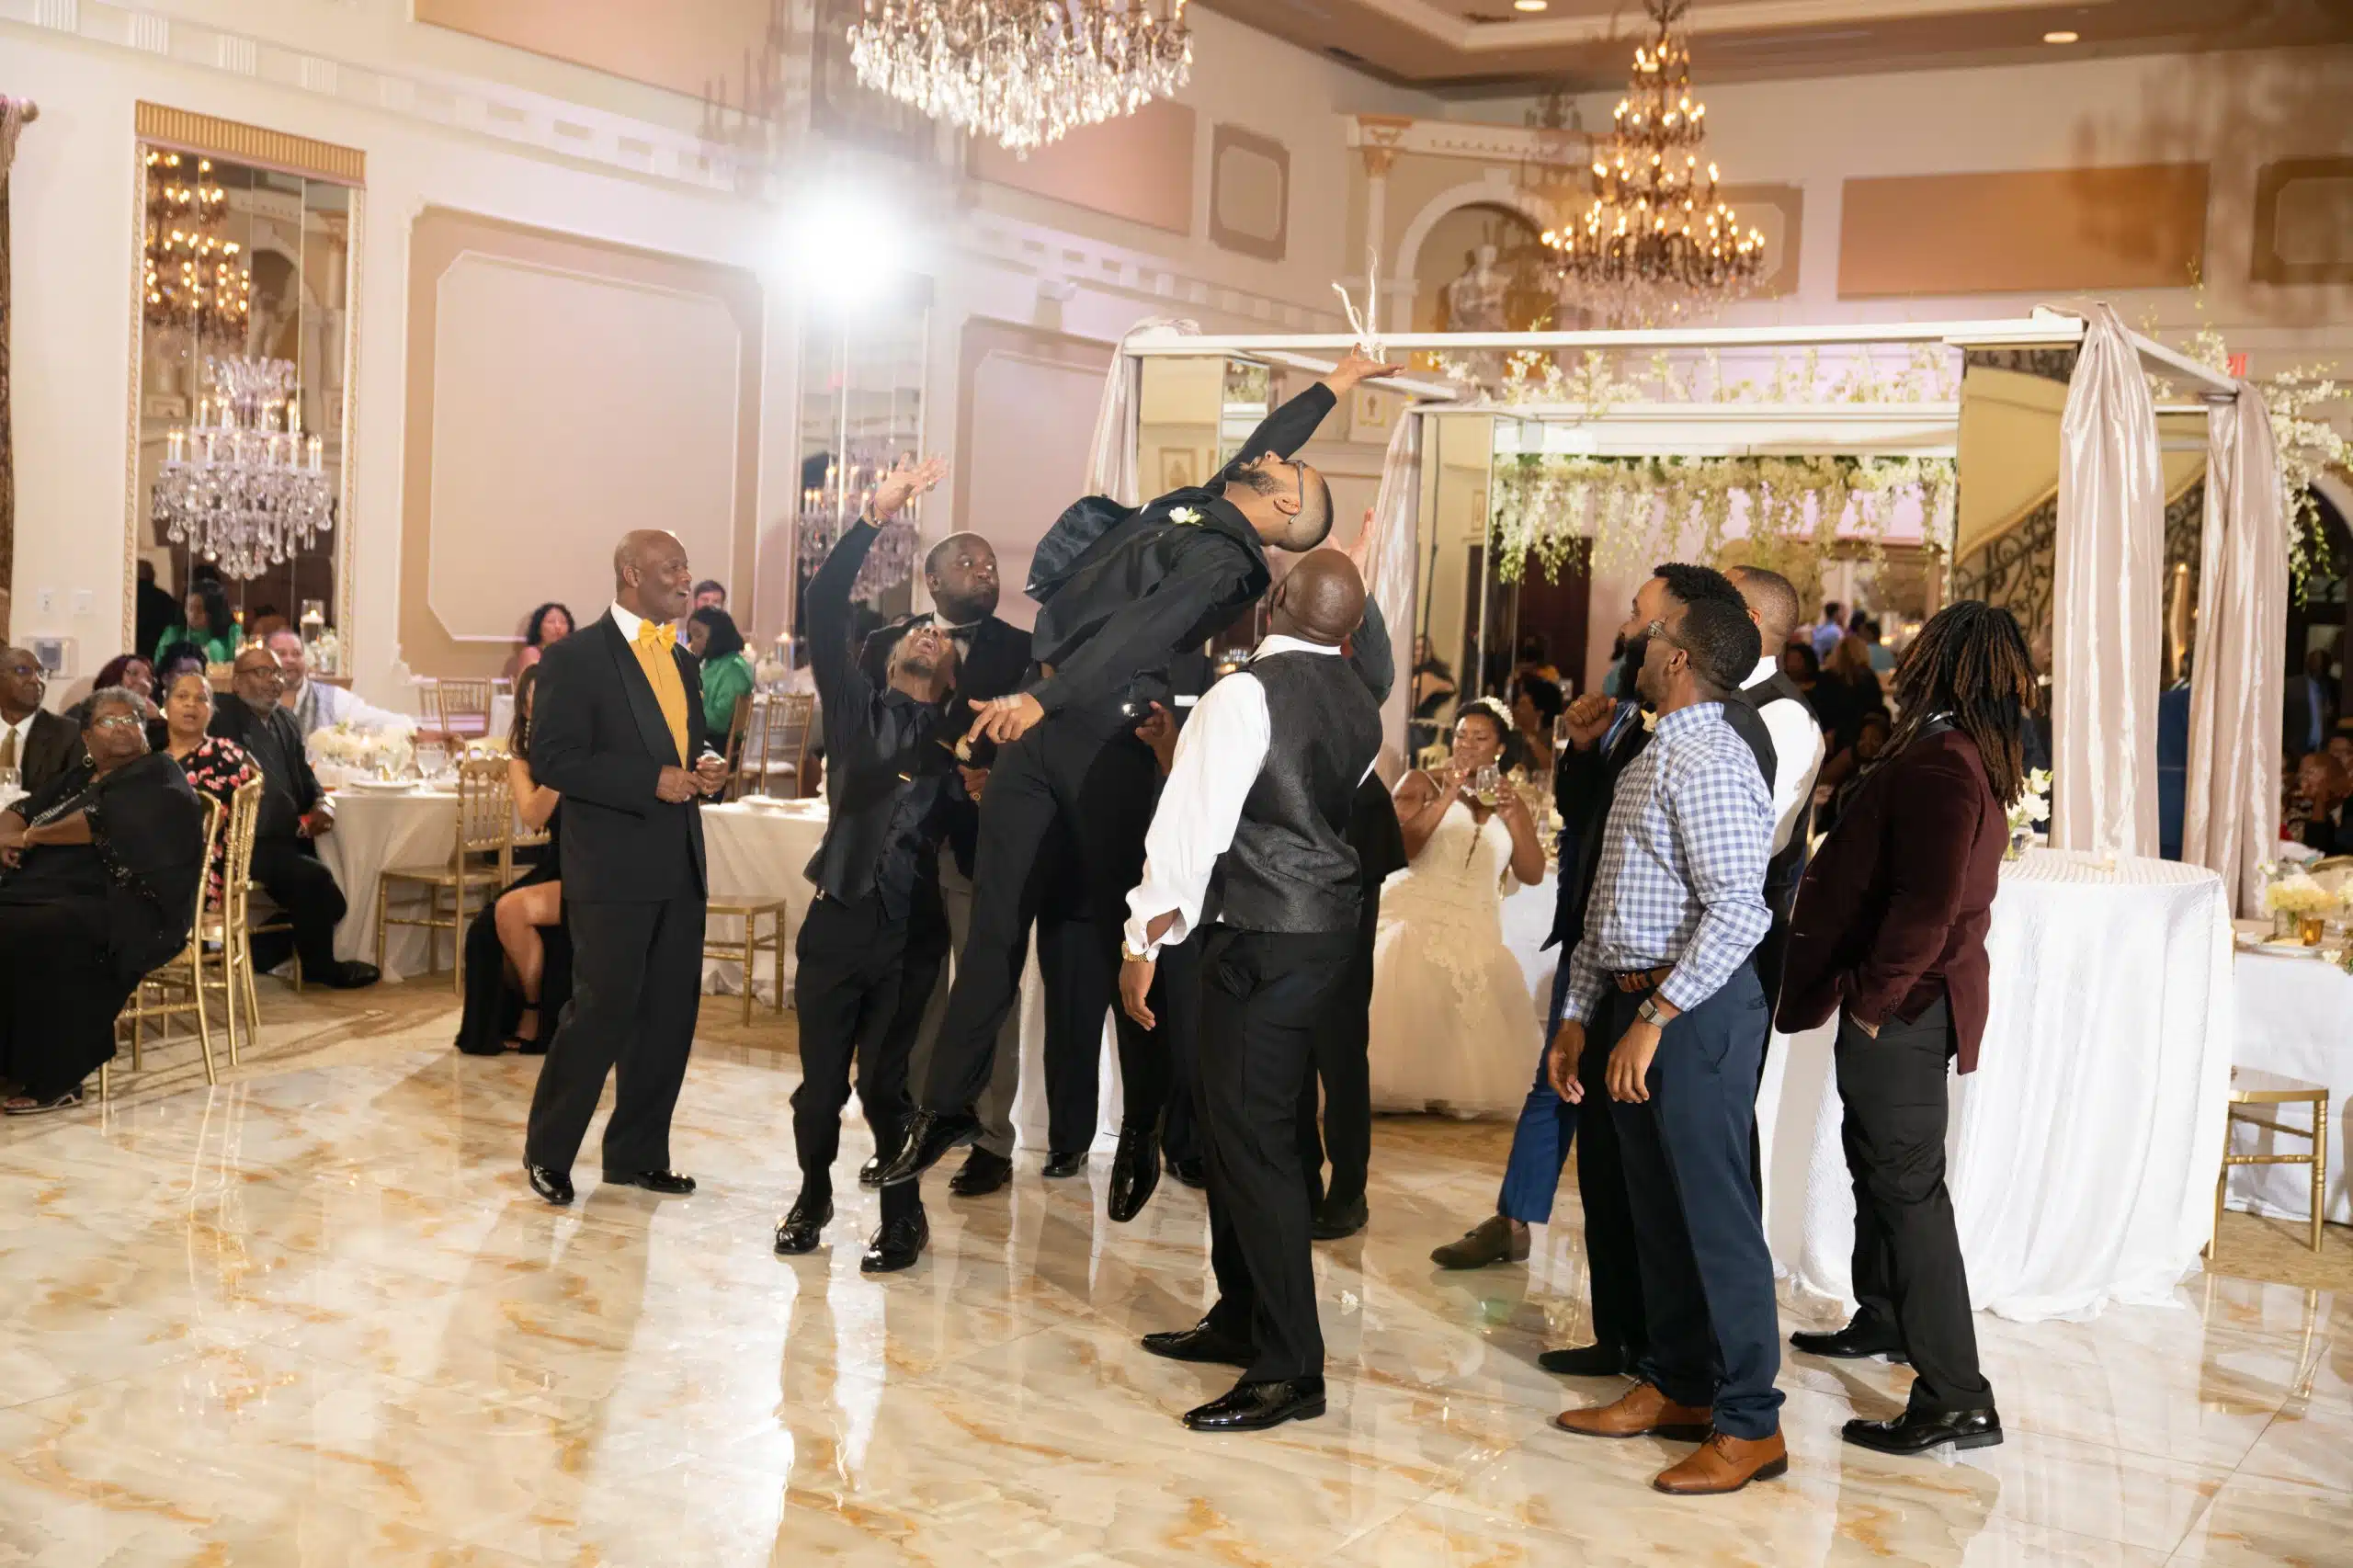 Man jump up high above everyone in a raleigh, nc wedding venue. This part of the wedding is a small detail of the wedding planning process.